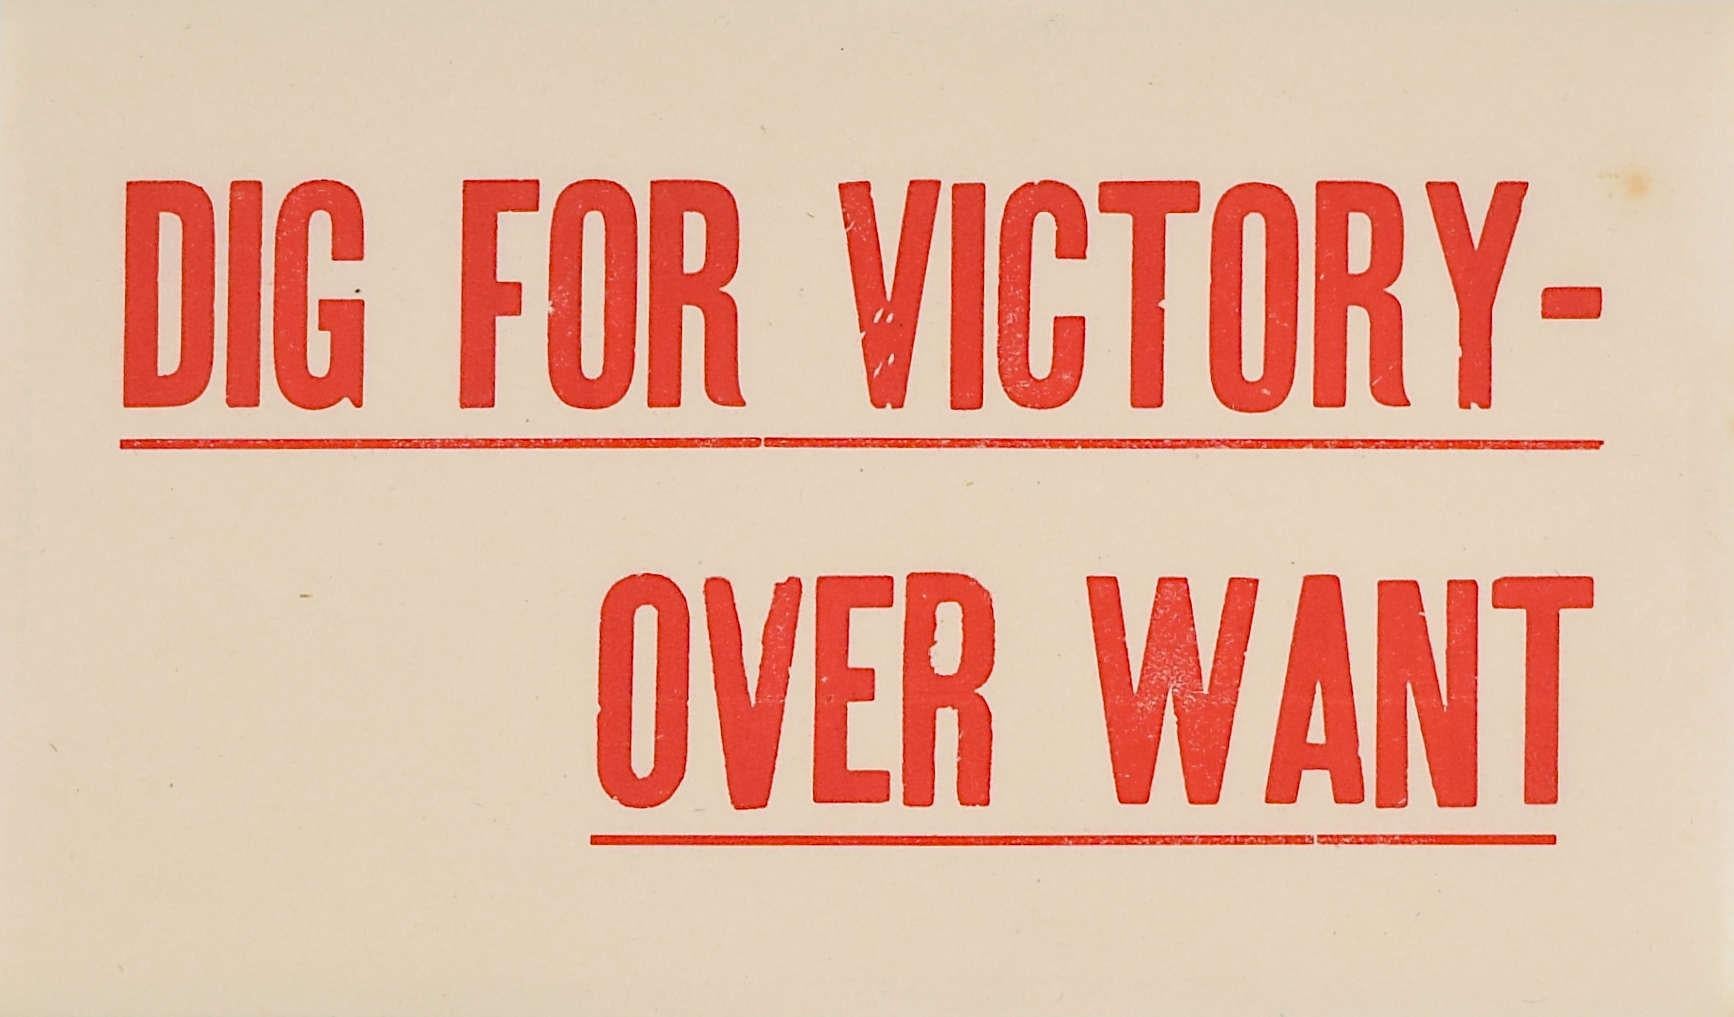 Unknown Print - Dig for Victory over Want - World War II public information poster leaflet 